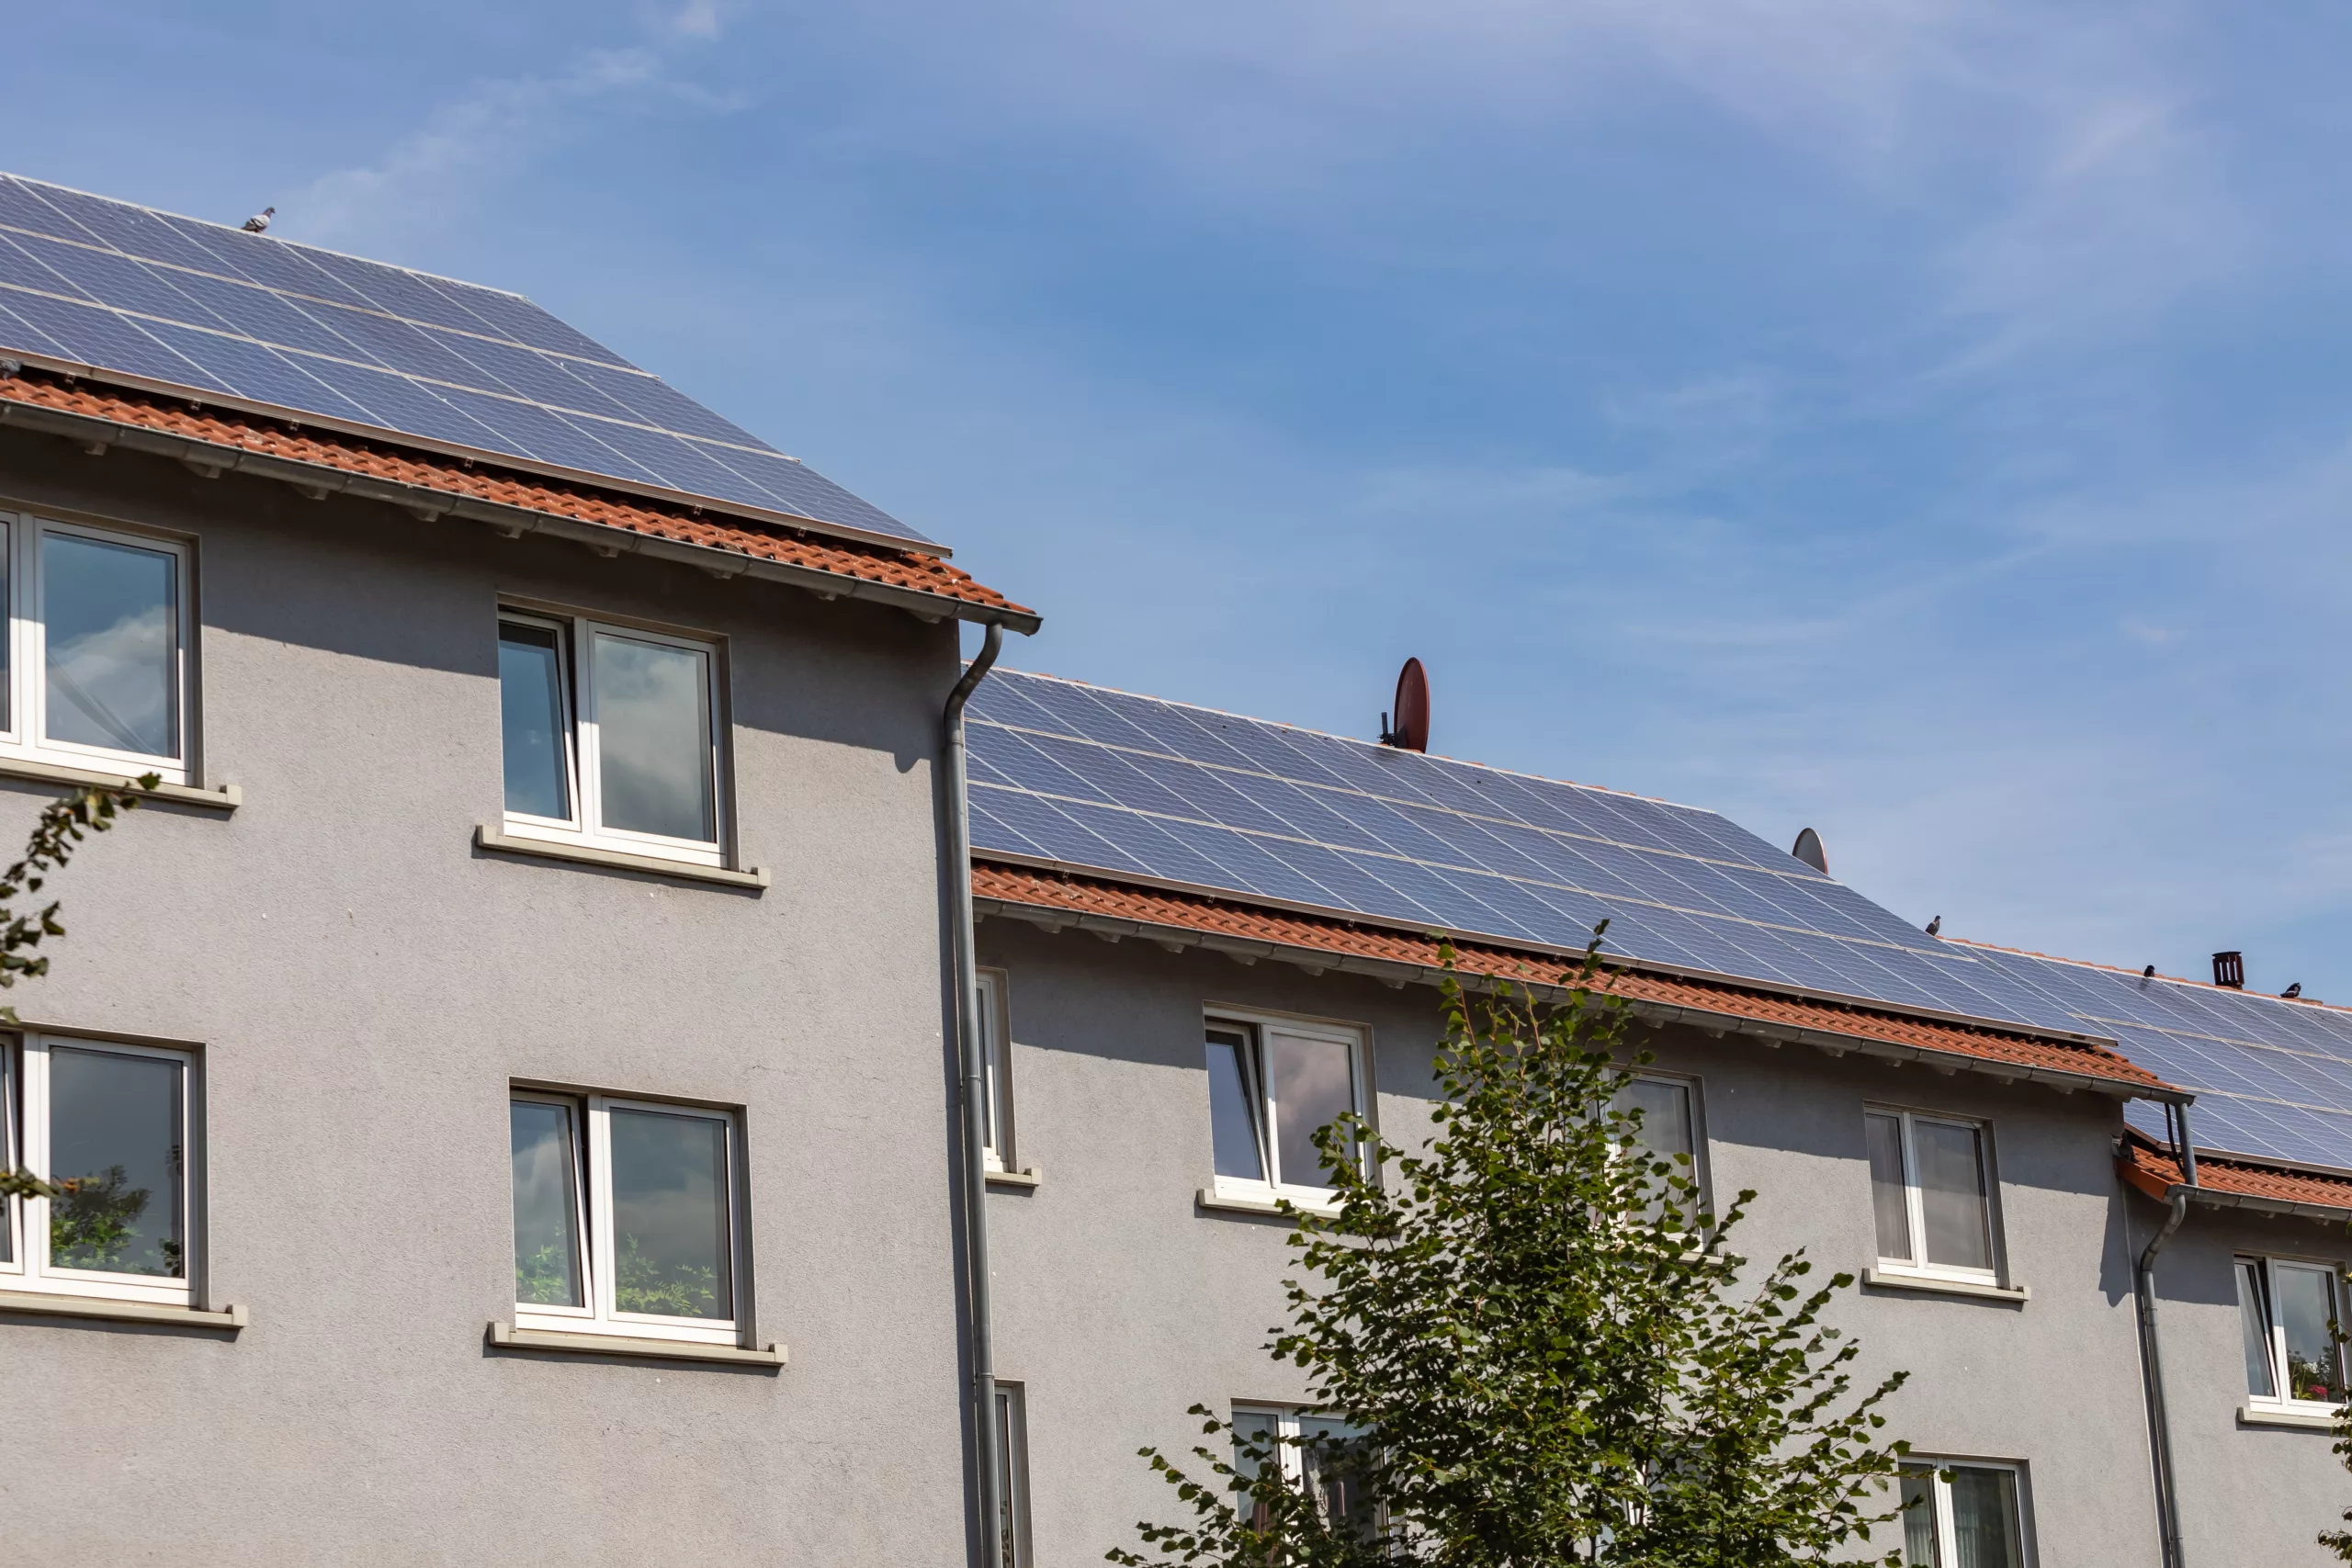 Solar on a multifamily household